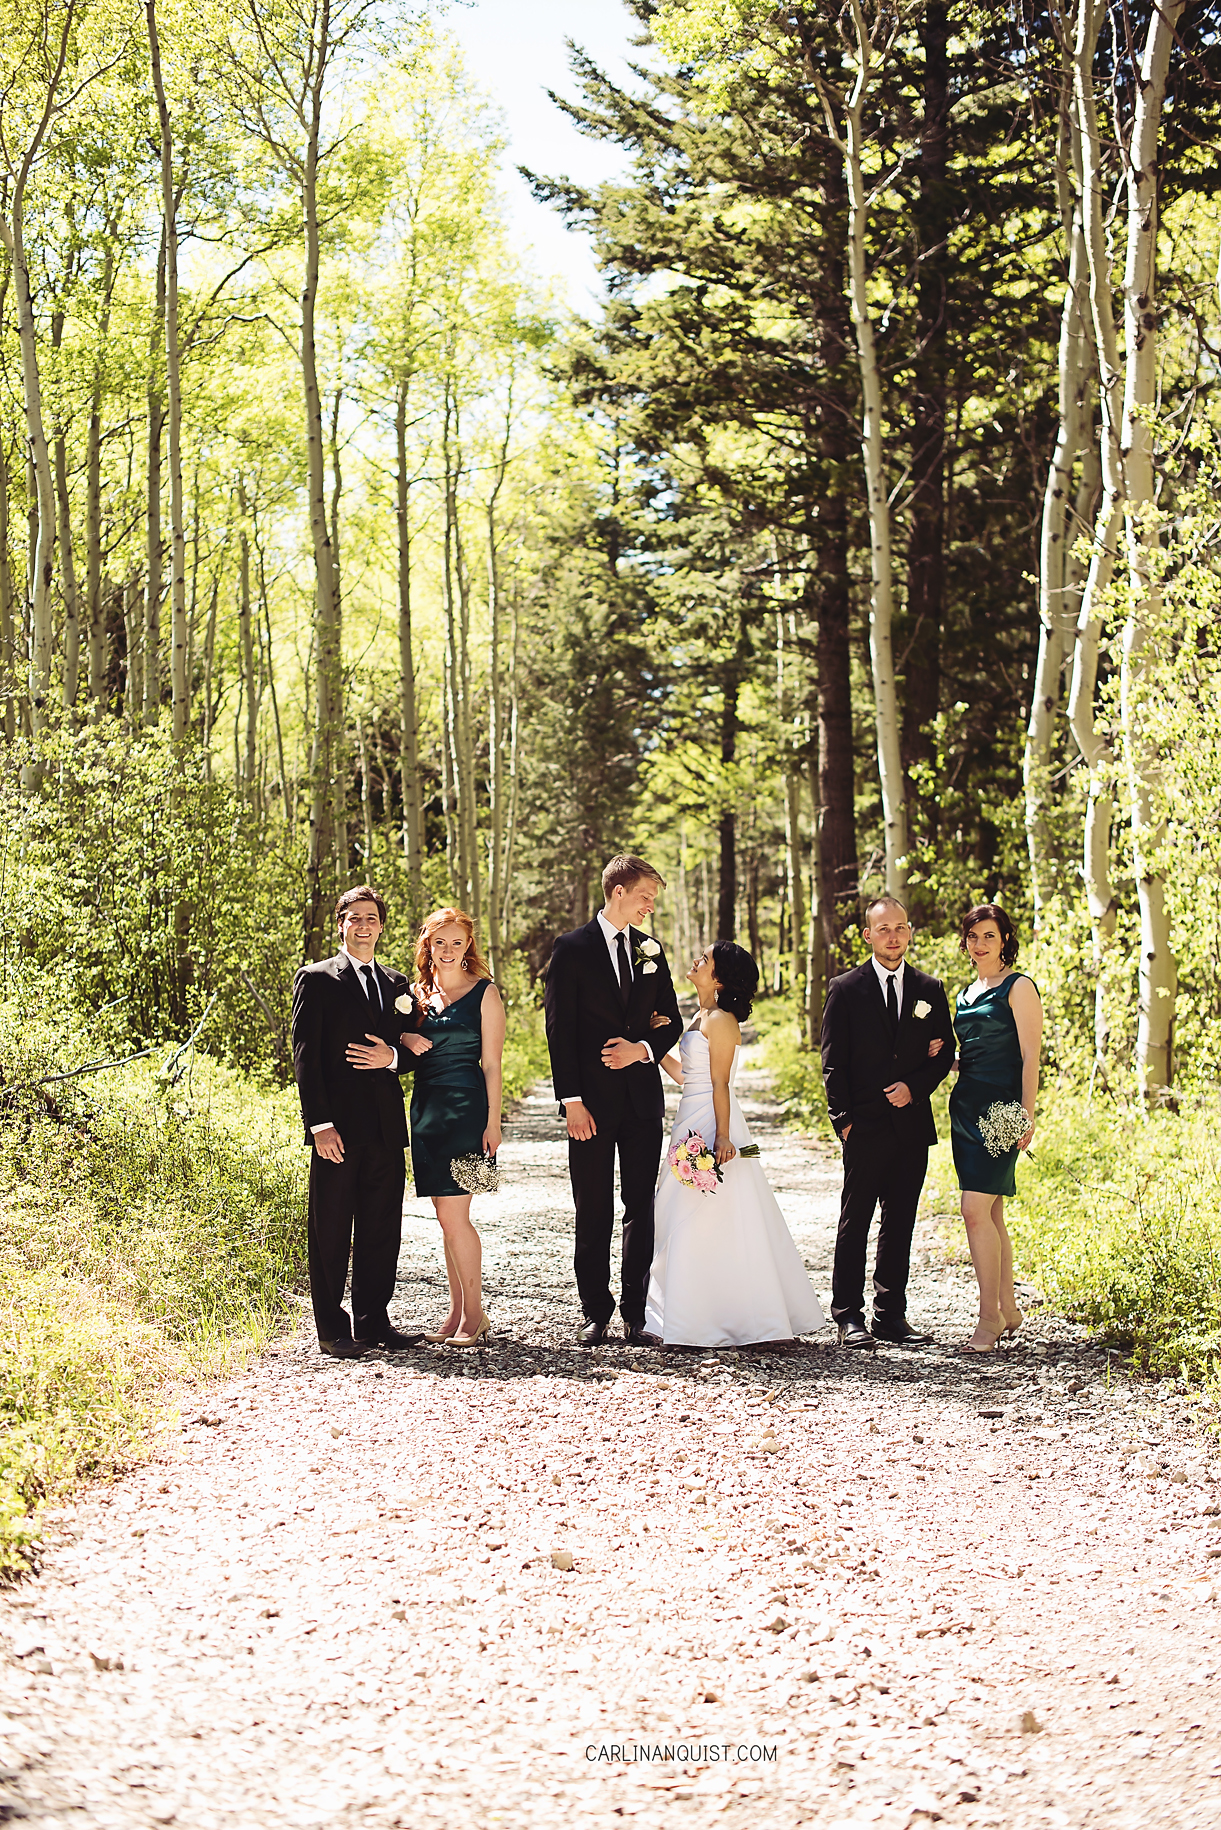 Bridal Party | Green Bridesmaids Dresses | Crowsnest Pass Wedding Photographer | Carlin Anquist Photography